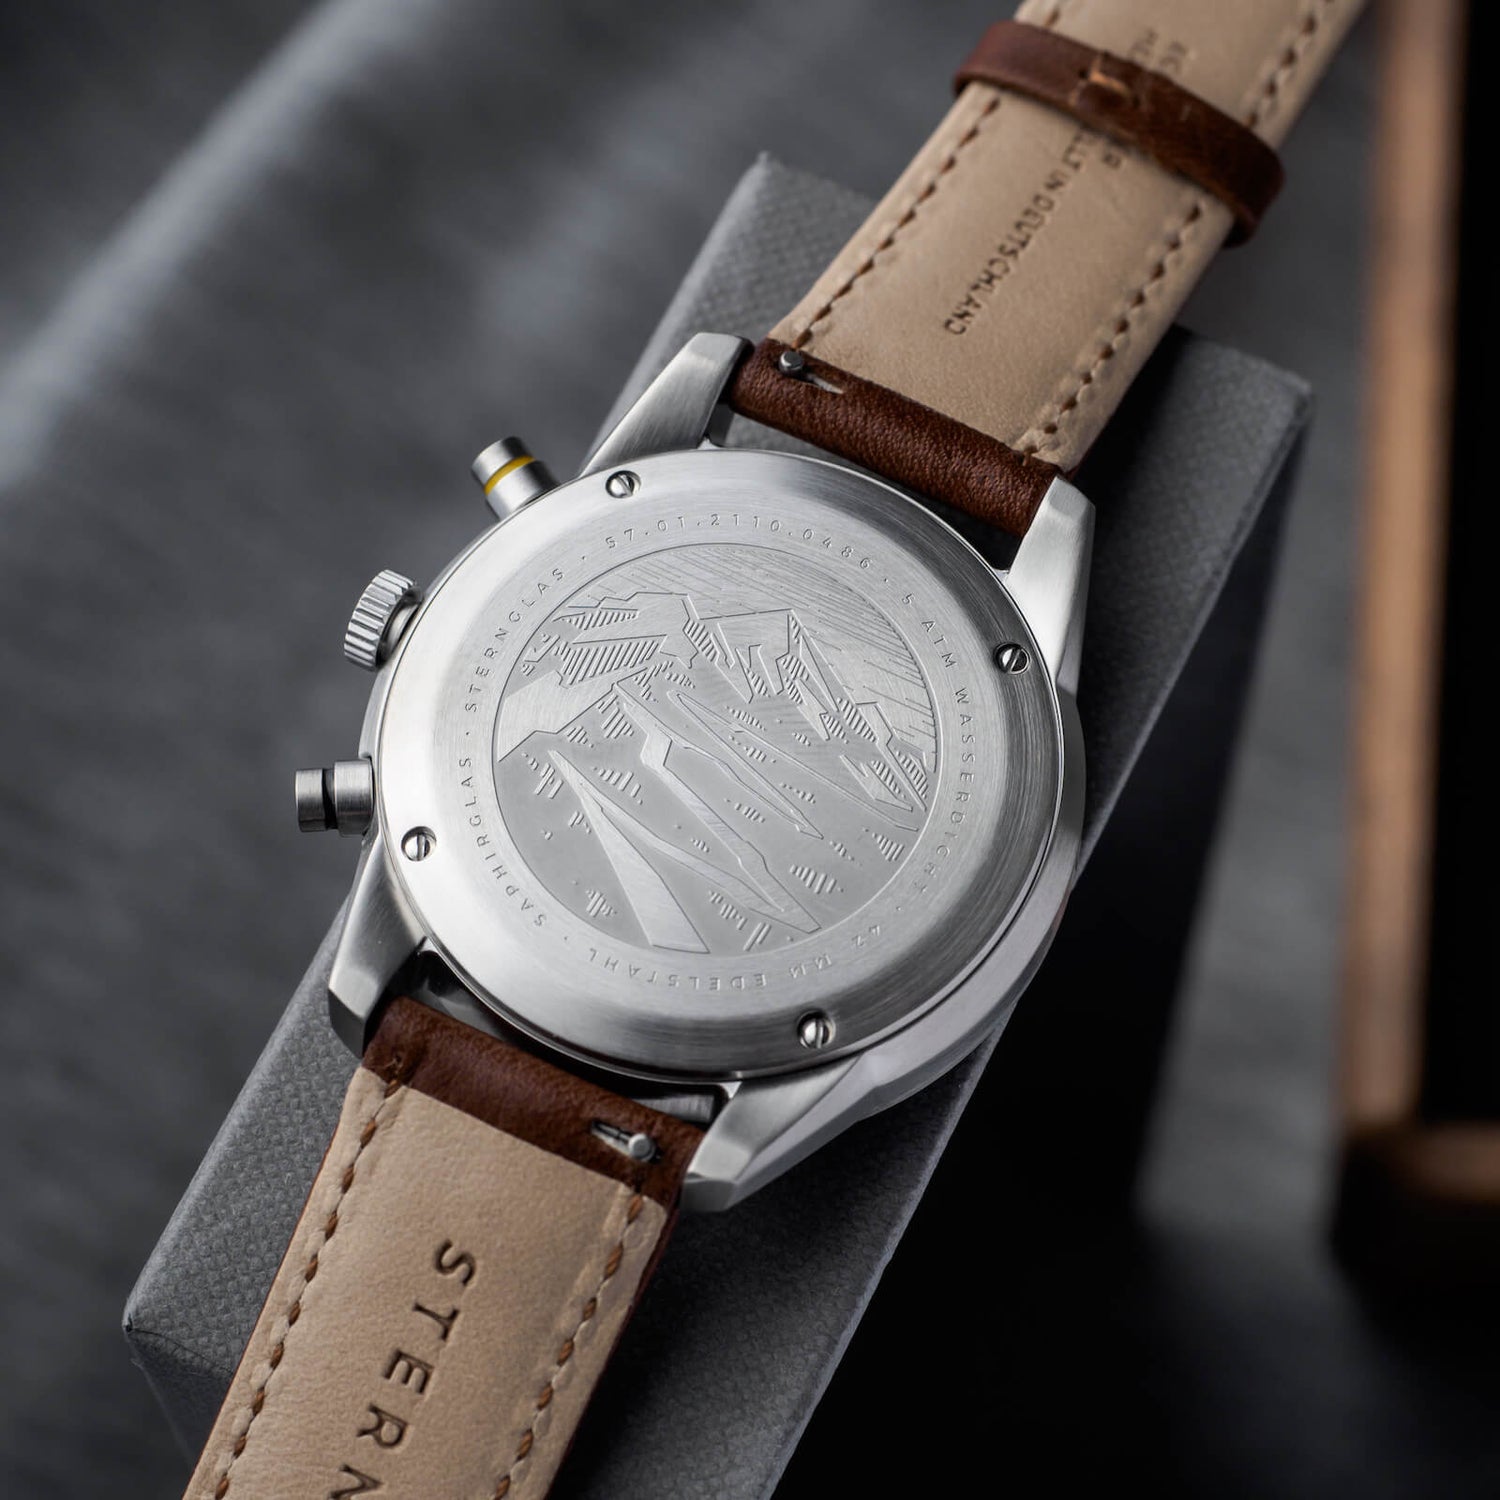 popup|Italian leather strap|The "Modena" leather strap - made in Germany - impresses with its fine dome and high-quality decorative stitching.